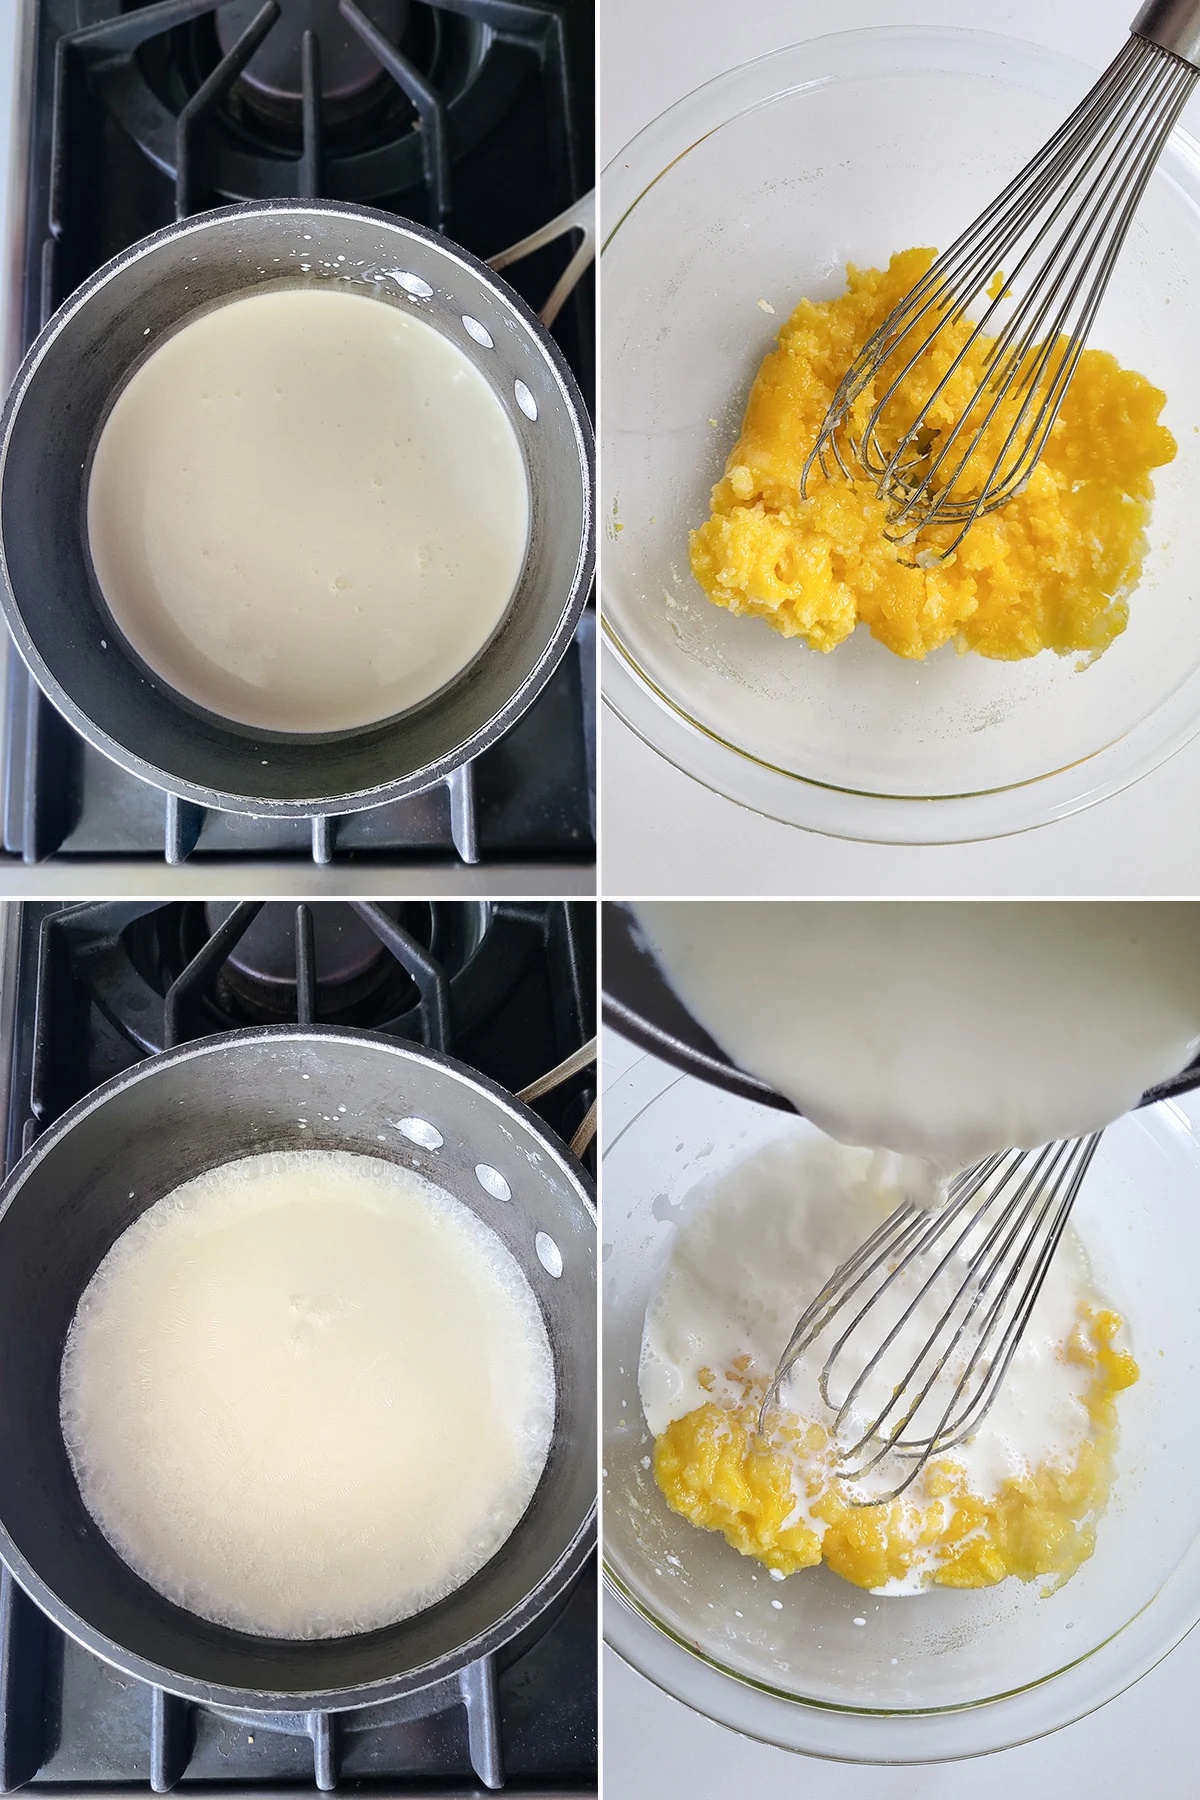 Milk heating in a pot. A bowl of egg yolks and sugar.